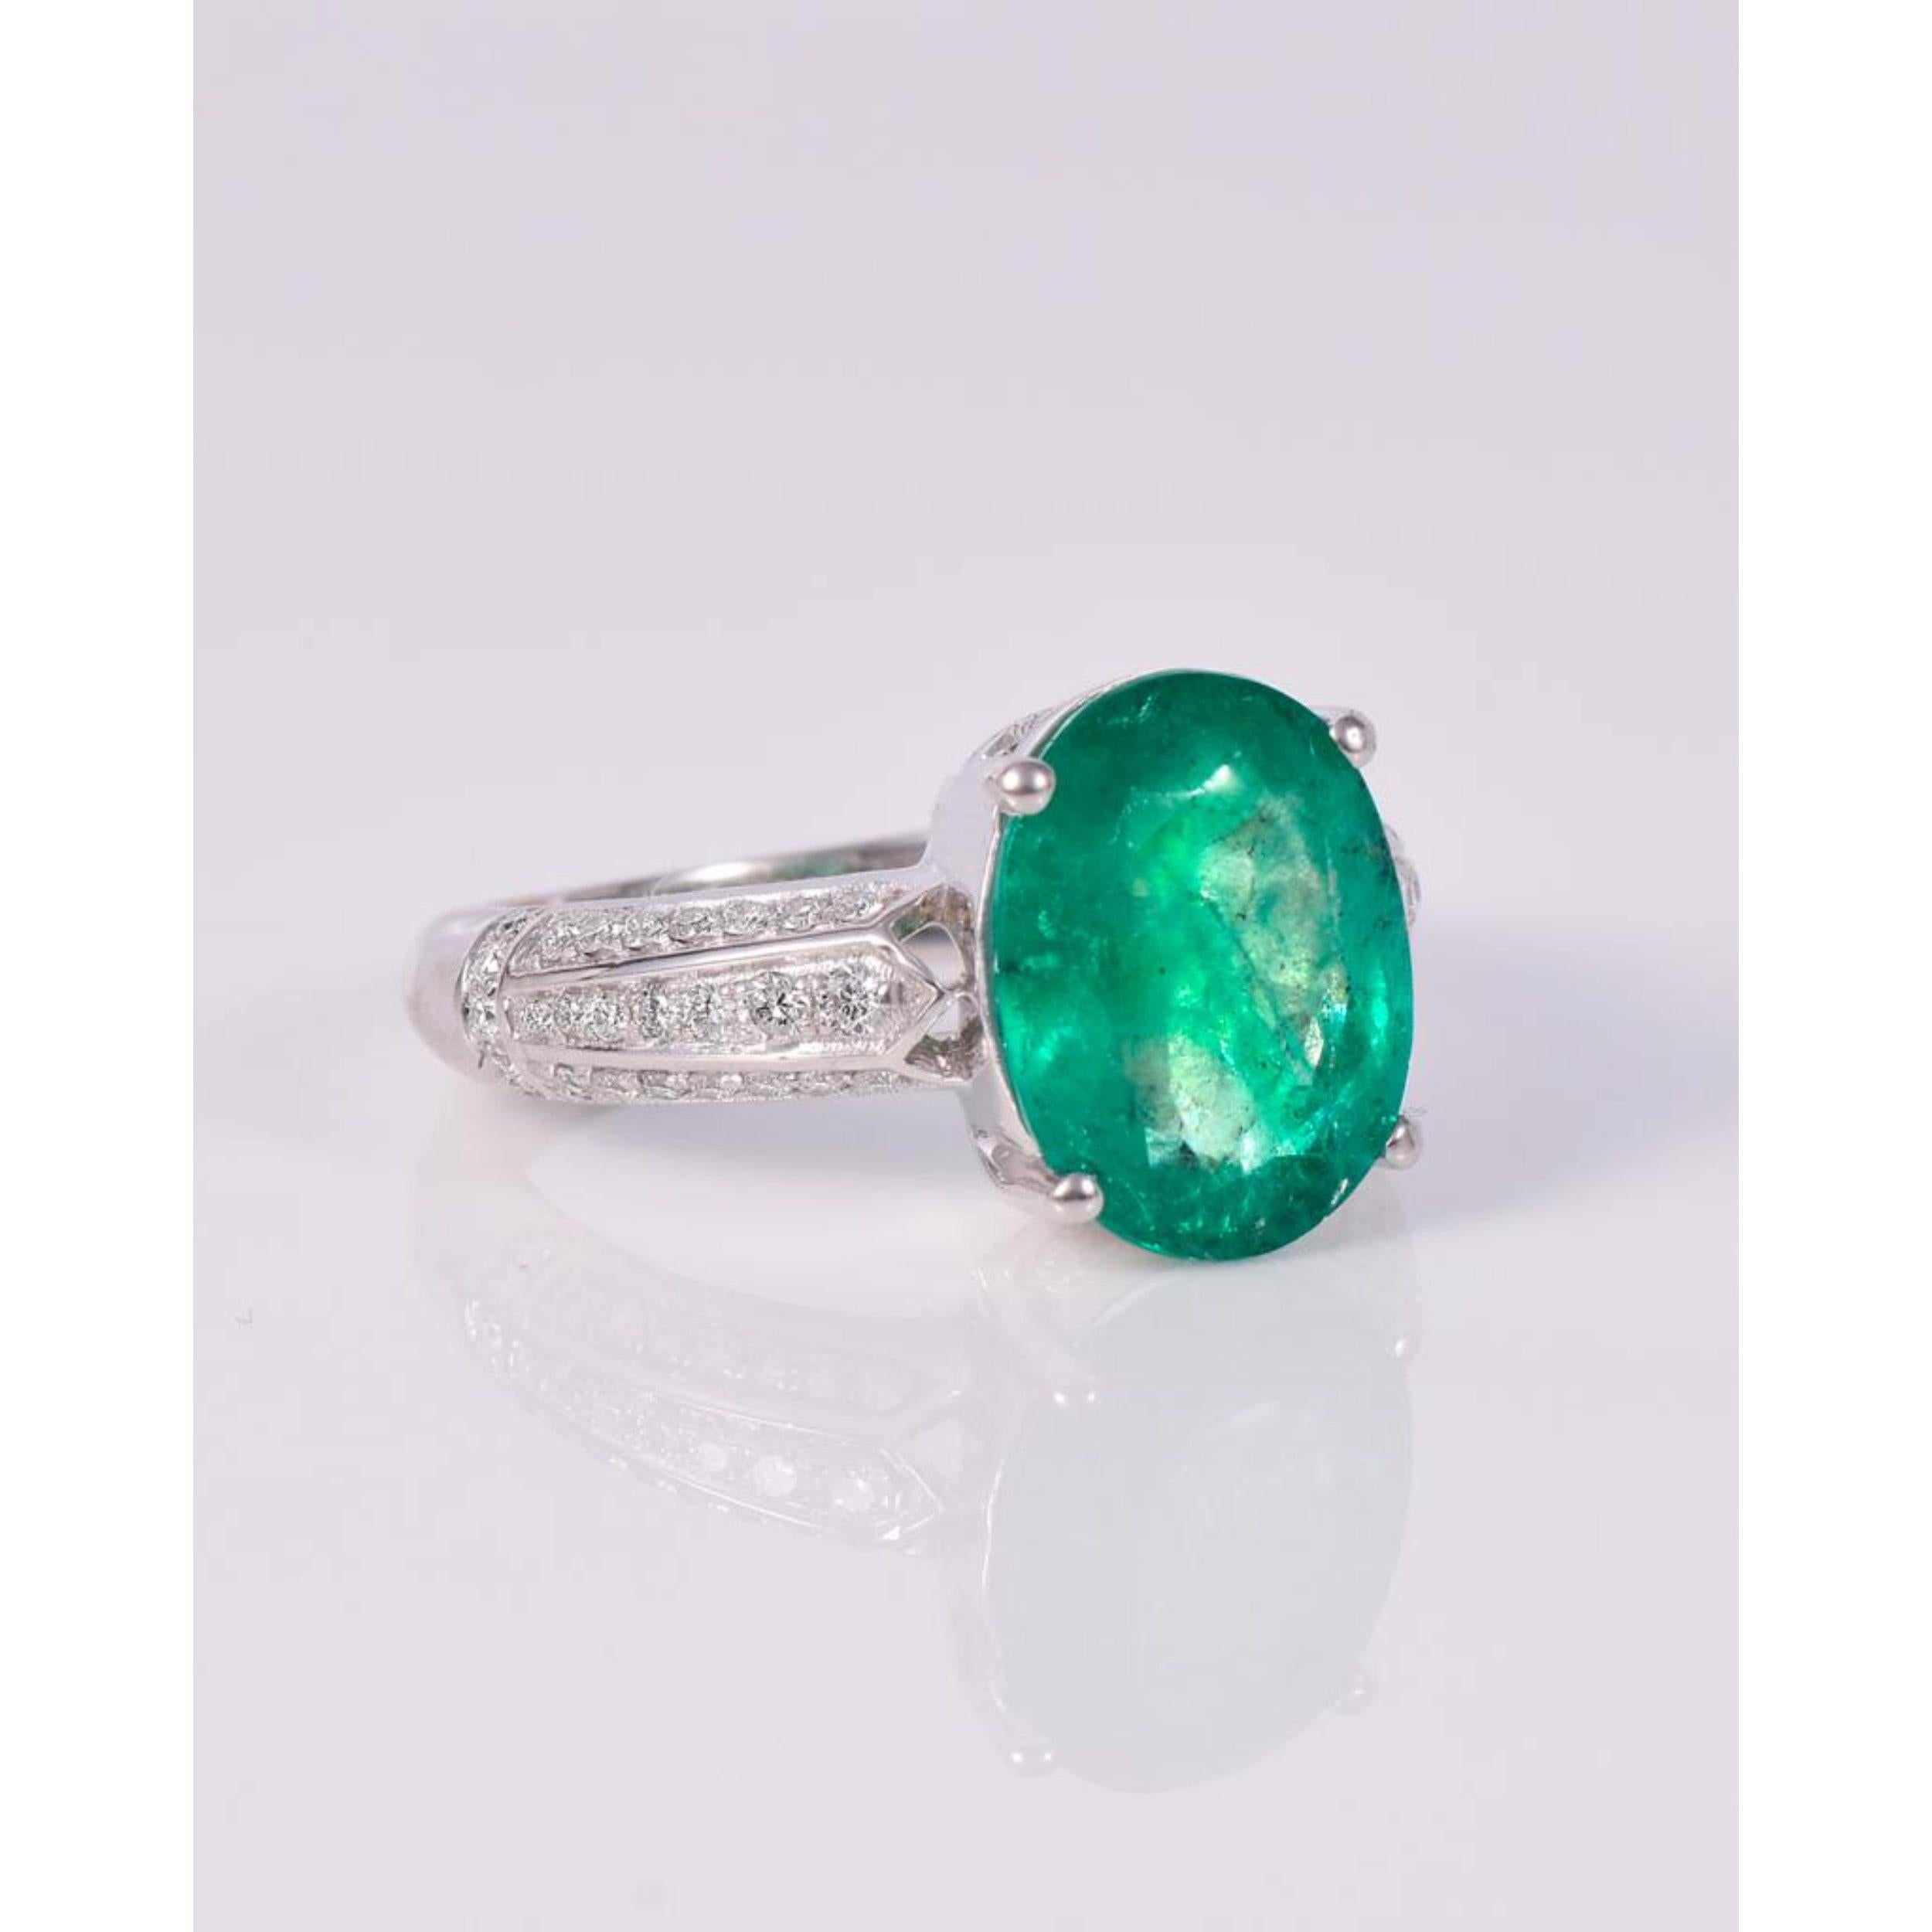 For Sale:  Certified 3 Carat Oval Cut Emerald Diamond Wedding Band, Vintage Engagement Ring 3